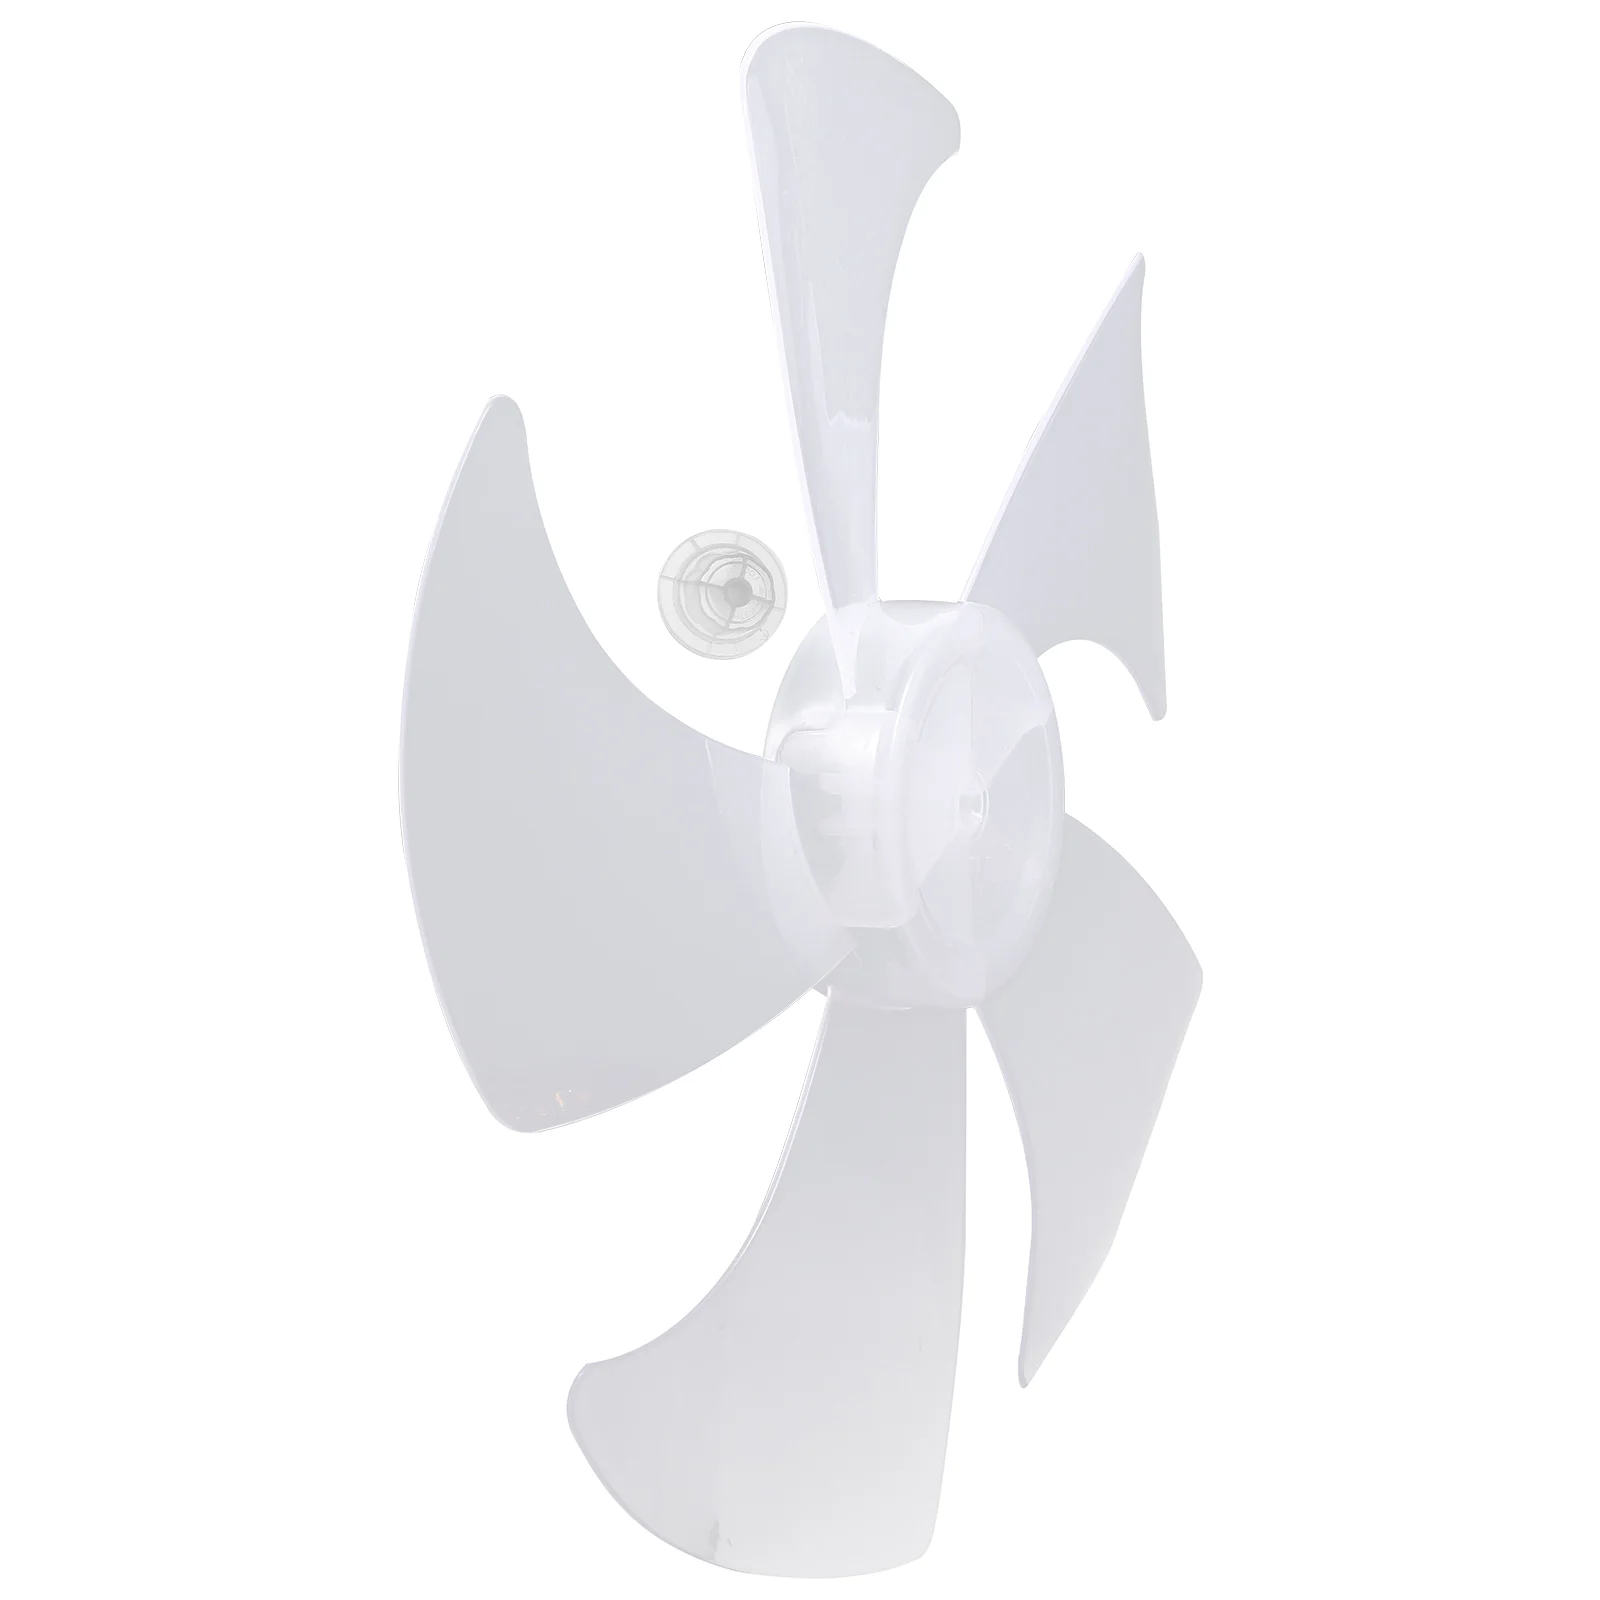 14Inch Ceiling Desktop Fans Blades Electric Ceiling Desktop Fans Replacement Ceiling Desktop Fans Blades Thickened Universal 5 sets blade balancing kit ceiling fans suite clips blades for tool metal replacement